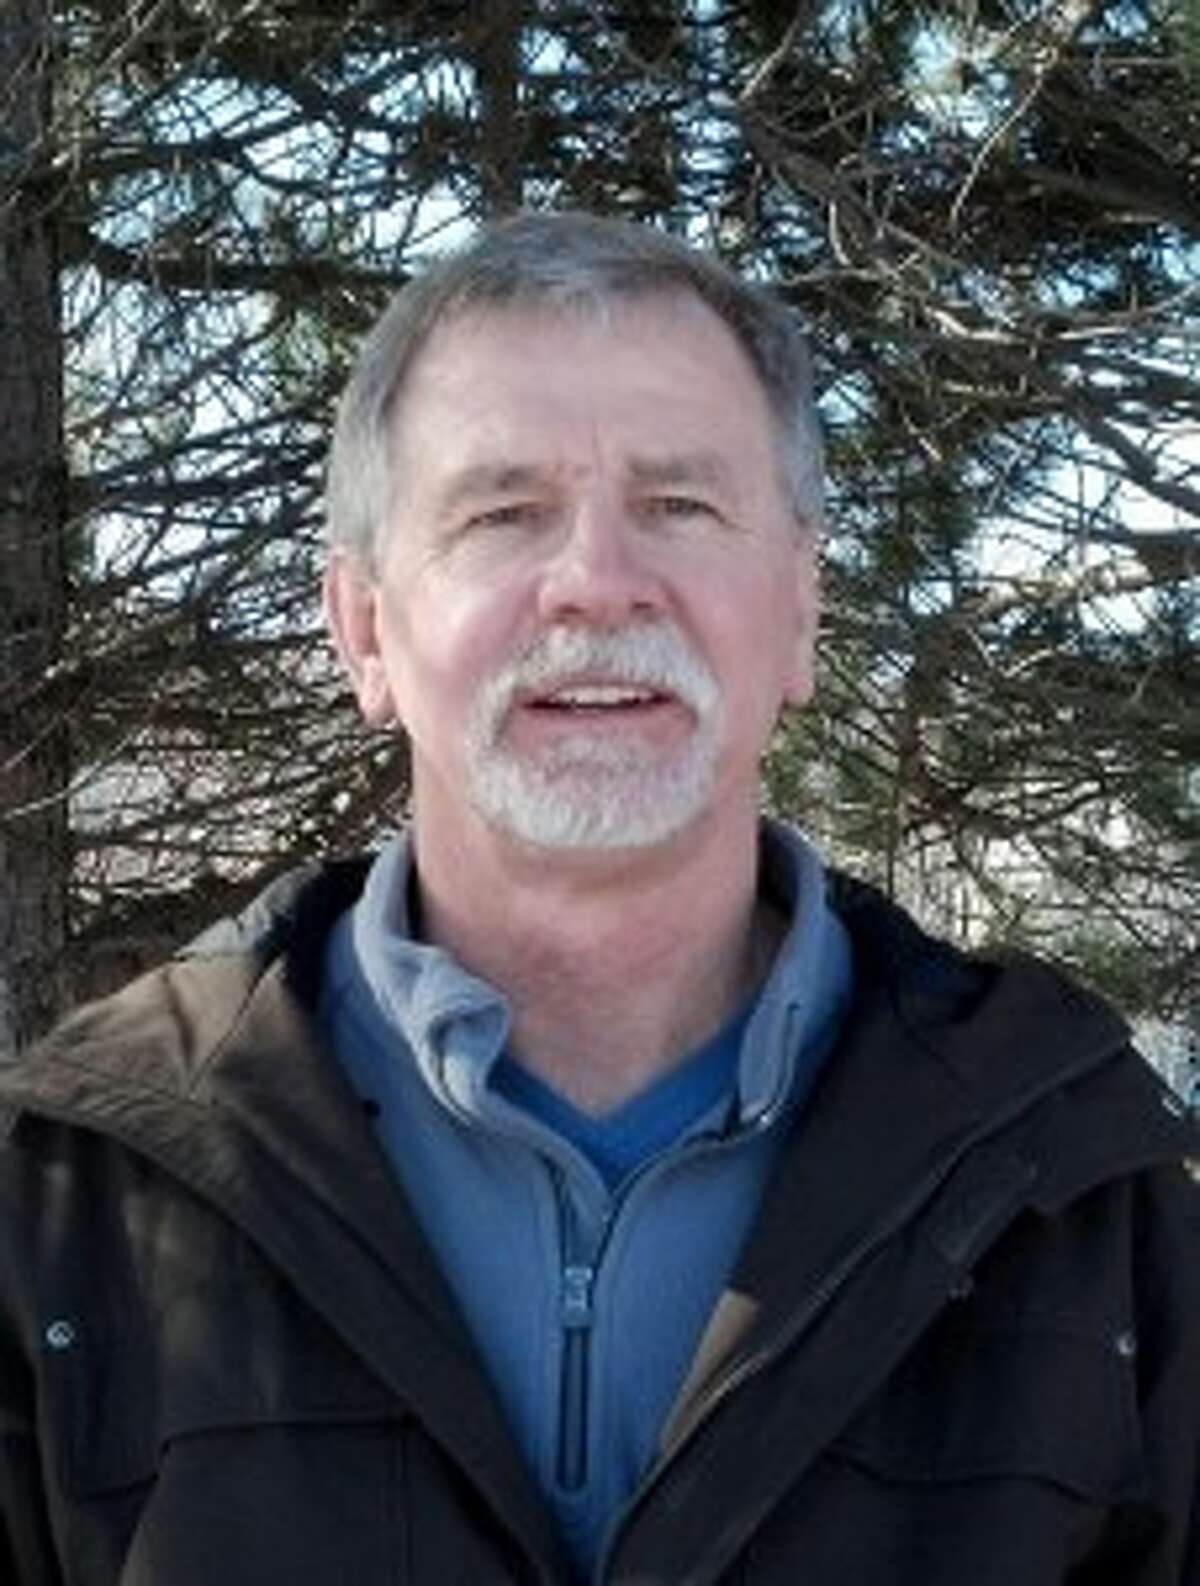 "The MCRC is hopeful that transportation funding will be finally increased regardless if the decision is made by the legislators in Lansing or by a vote of the people," said Mark Sohlden, Manistee County Road Commission manager.